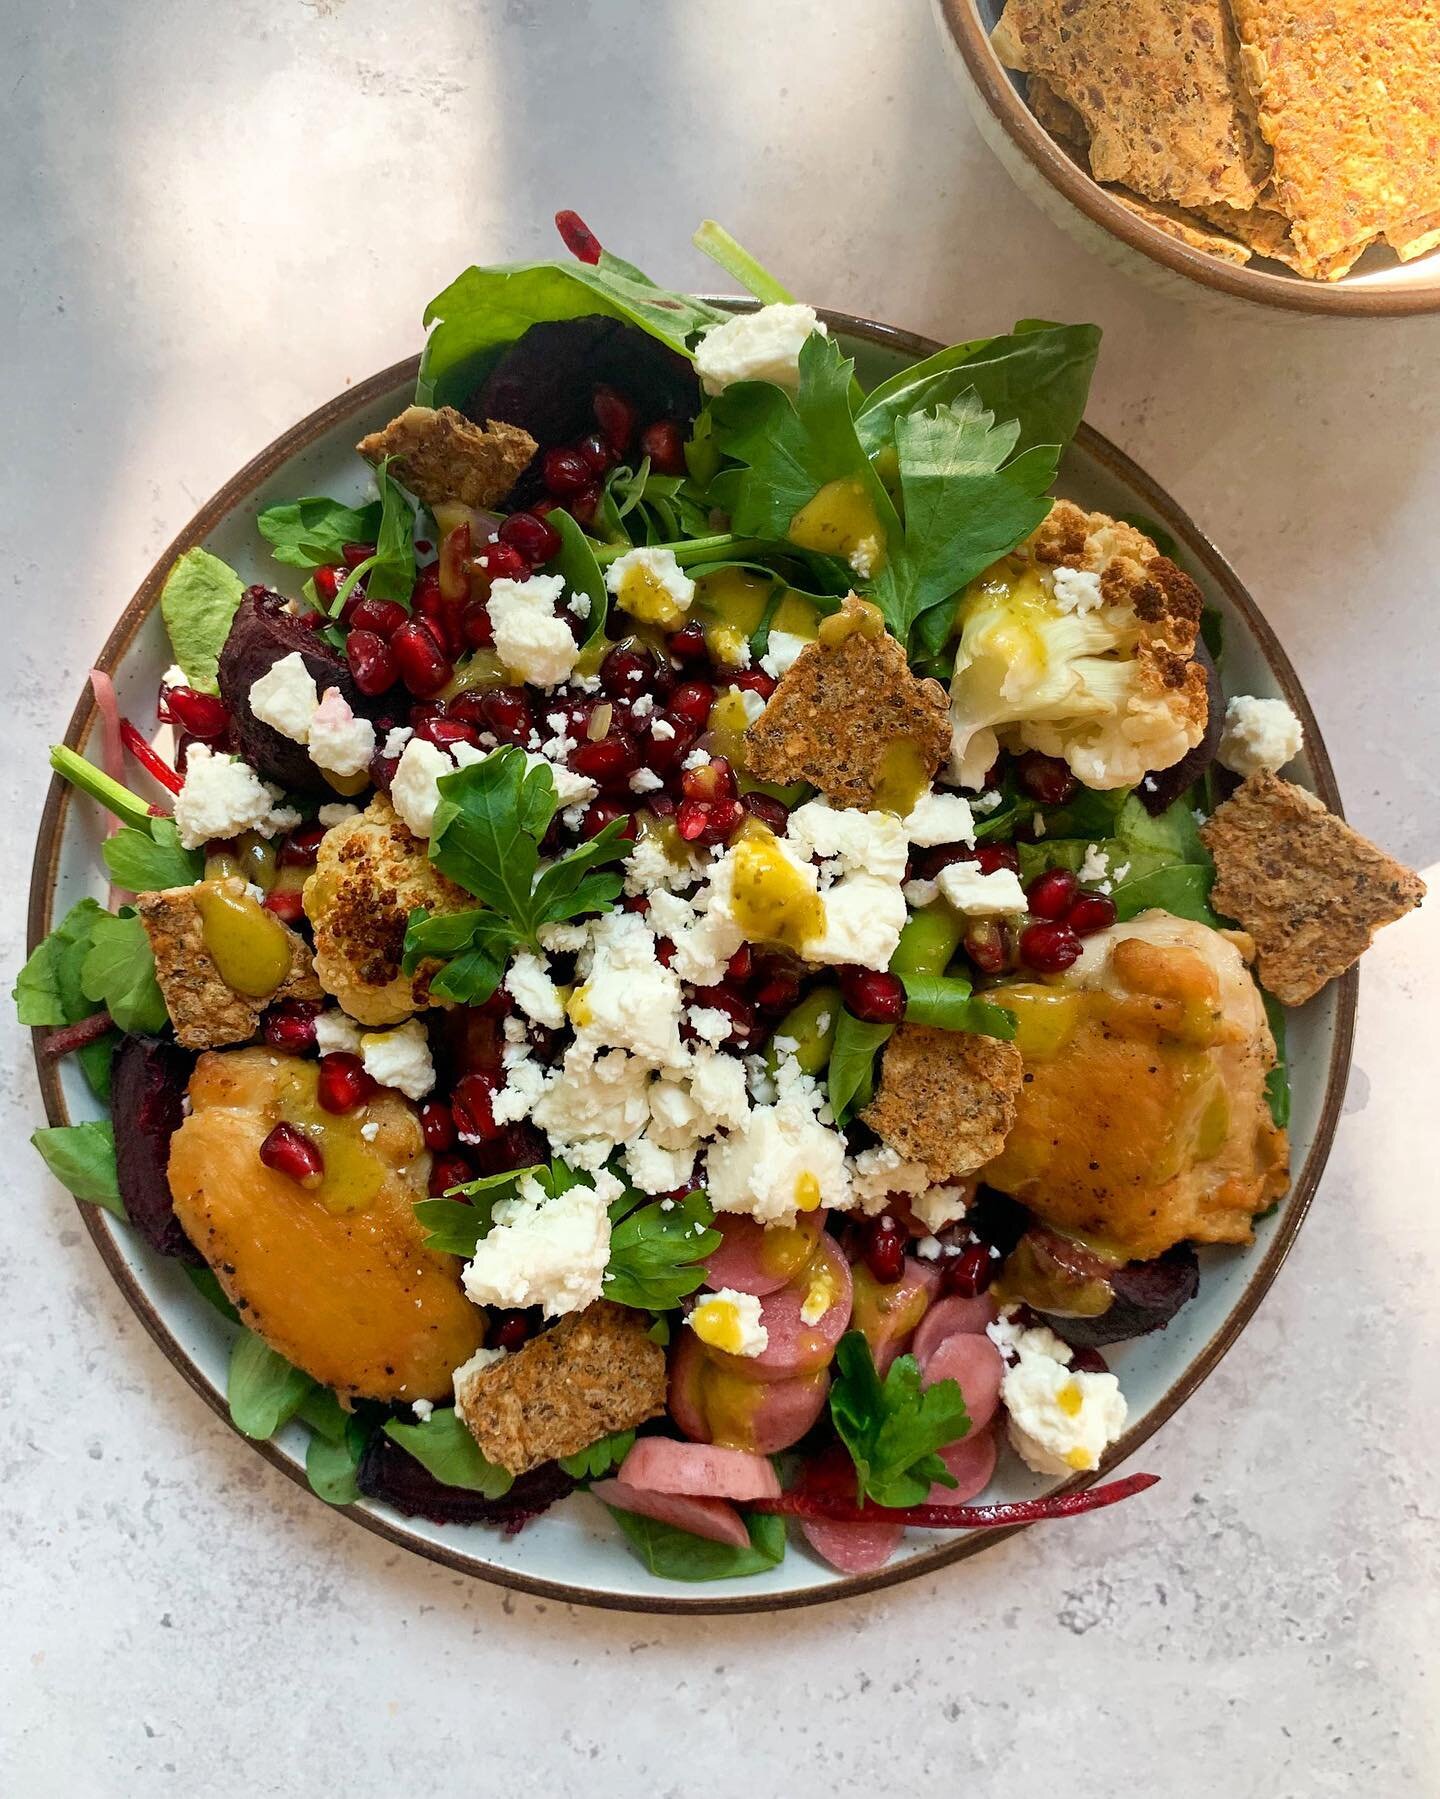 You know what they say. A salad a day keeps the doctors away&hellip; Especially when it&rsquo;s topped with our crunchy baked seed snacks!
.
This beauty by @chischomps contains a huge array of colourful, fibre packed ingredients including mixed leave